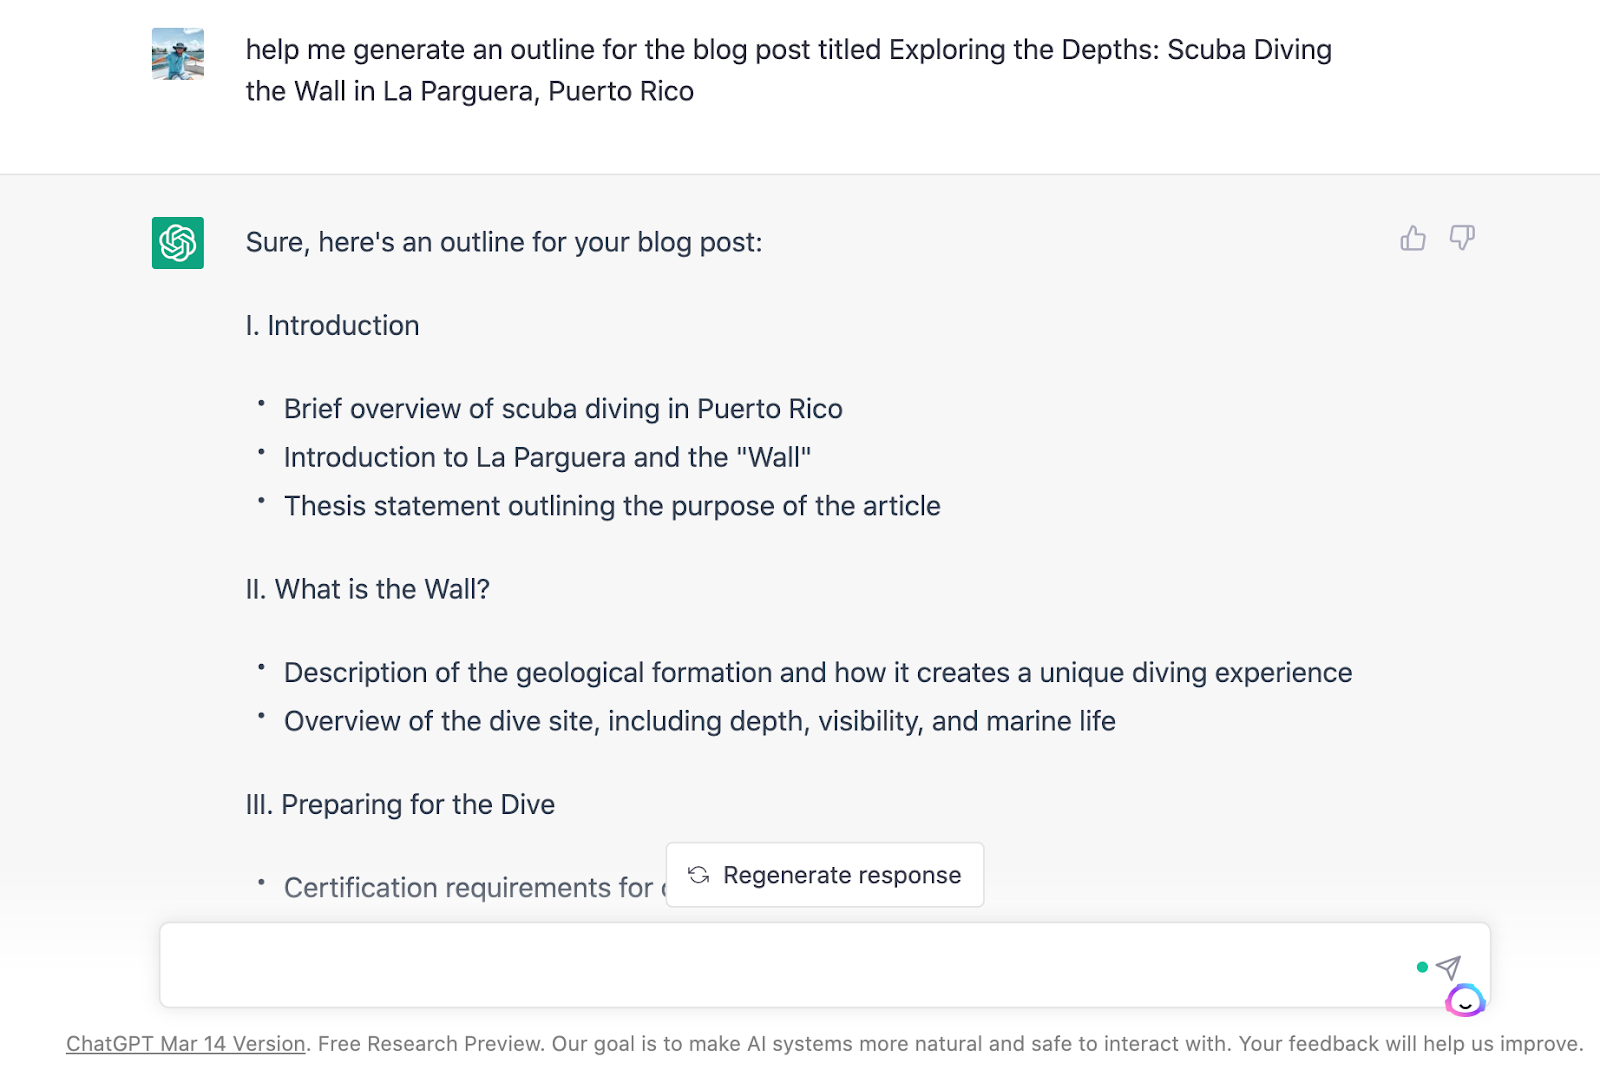 The image displays an example of ChatGPT generating an outline for a blog post. The technology produces points for an introduction and subheadings for an article about scuba diving in Puerto Rico.